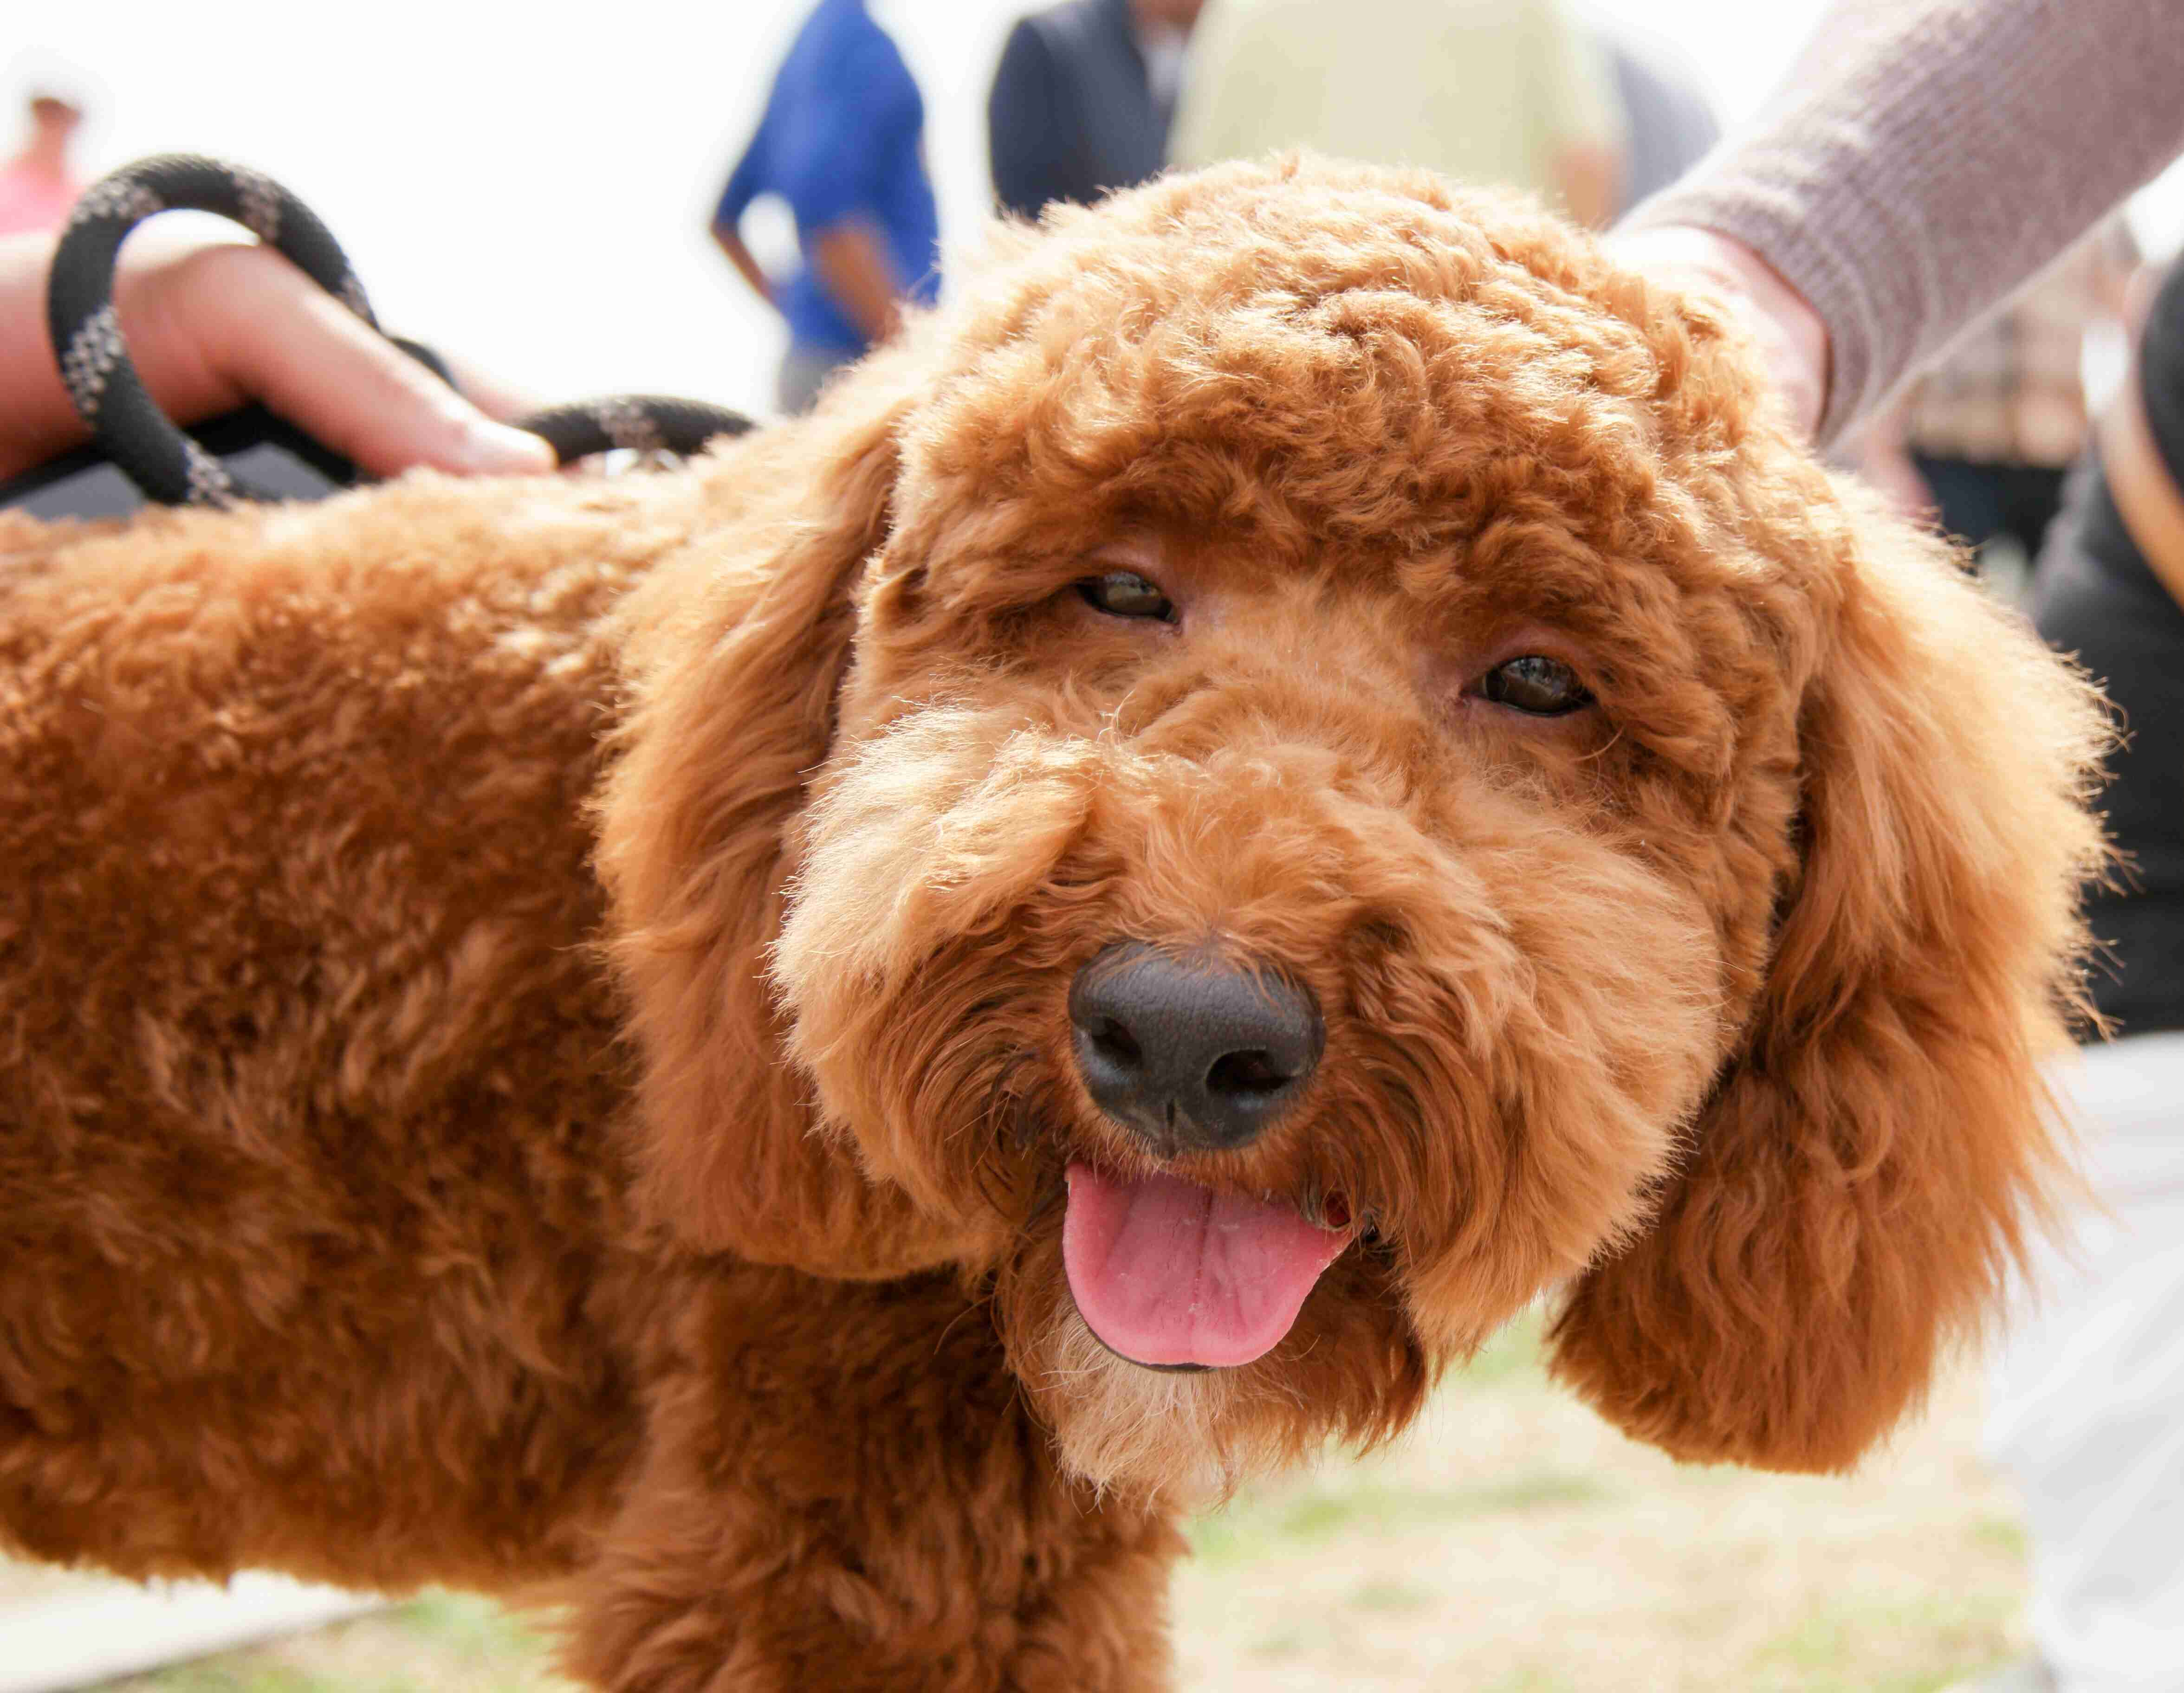 How can you ensure that your Poodle puppy is getting enough exercise during the first two weeks?